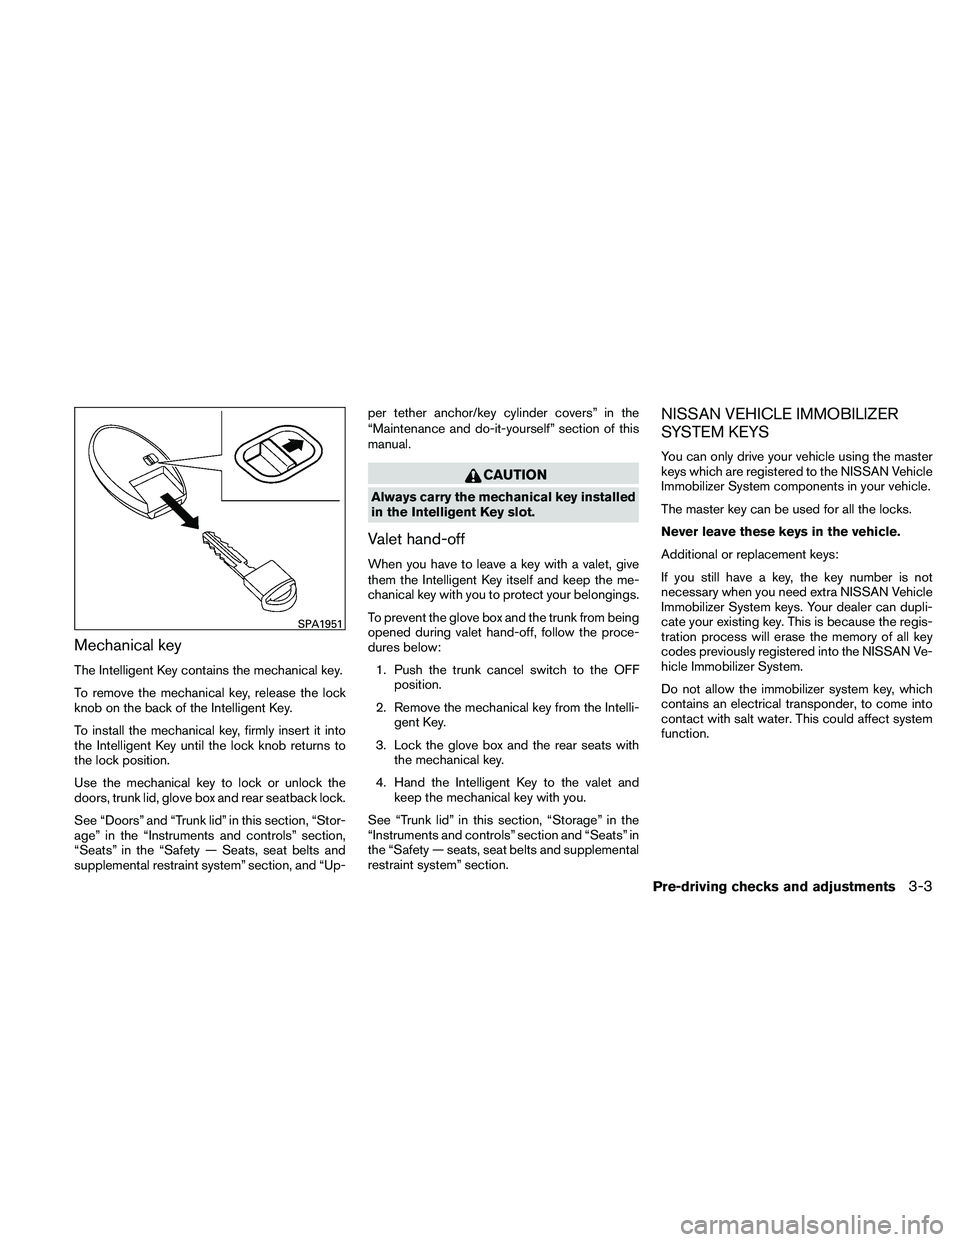 NISSAN ALTIMA 2011  Owners Manual Mechanical key
The Intelligent Key contains the mechanical key.
To remove the mechanical key, release the lock
knob on the back of the Intelligent Key.
To install the mechanical key, firmly insert it 